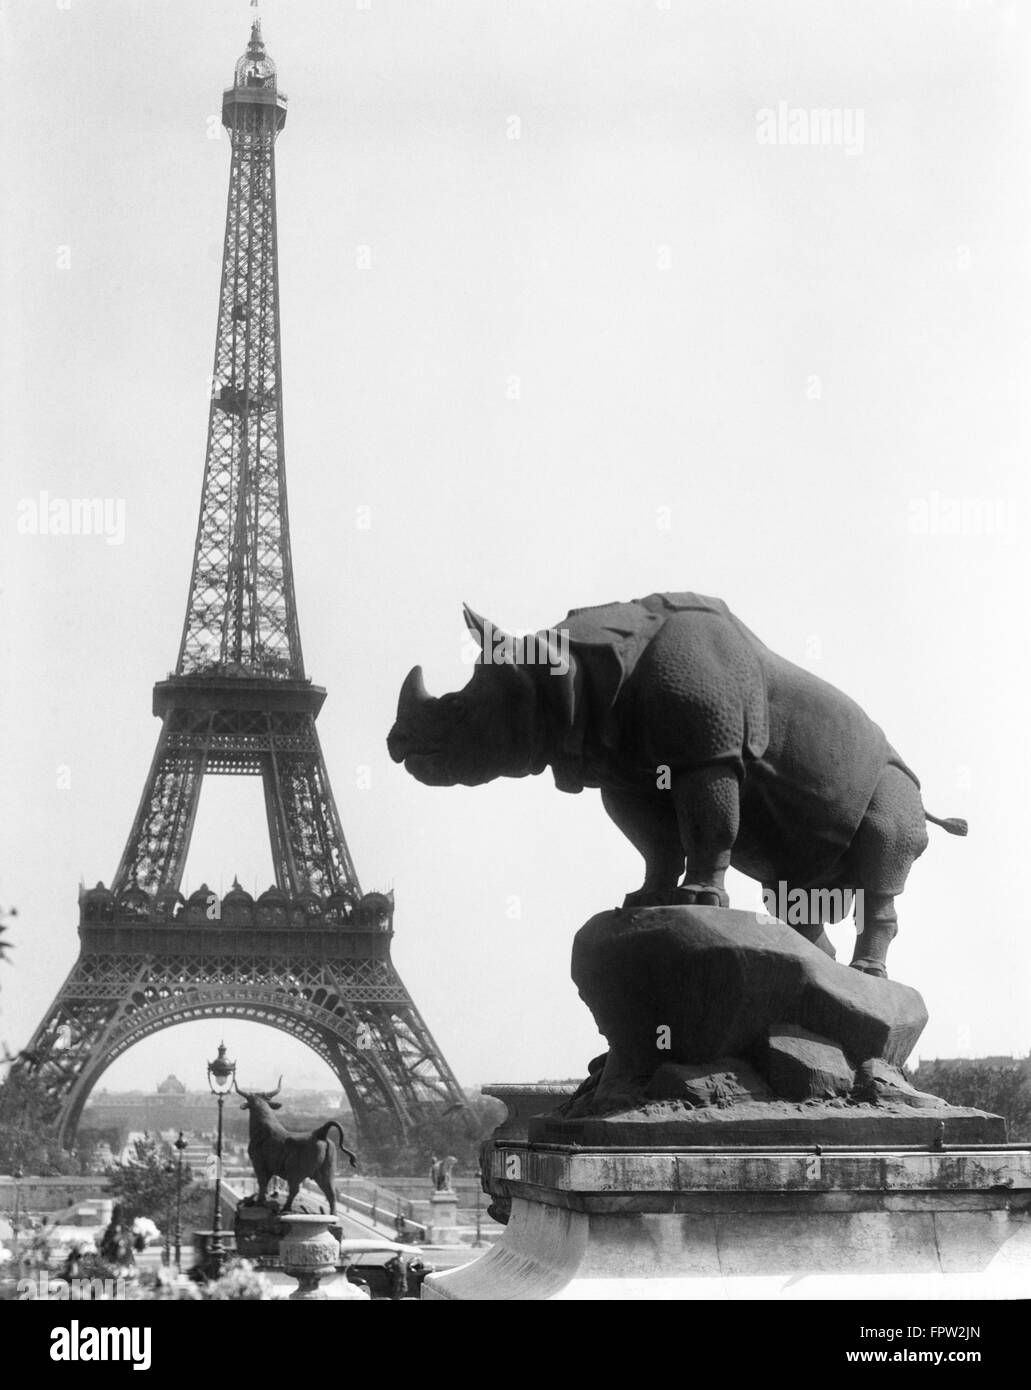 1920s RHINOCEROS STATUE IN FOREGROUND EIFFEL TOWER IN BACKGROUND PARIS FRANCE Stock Photo